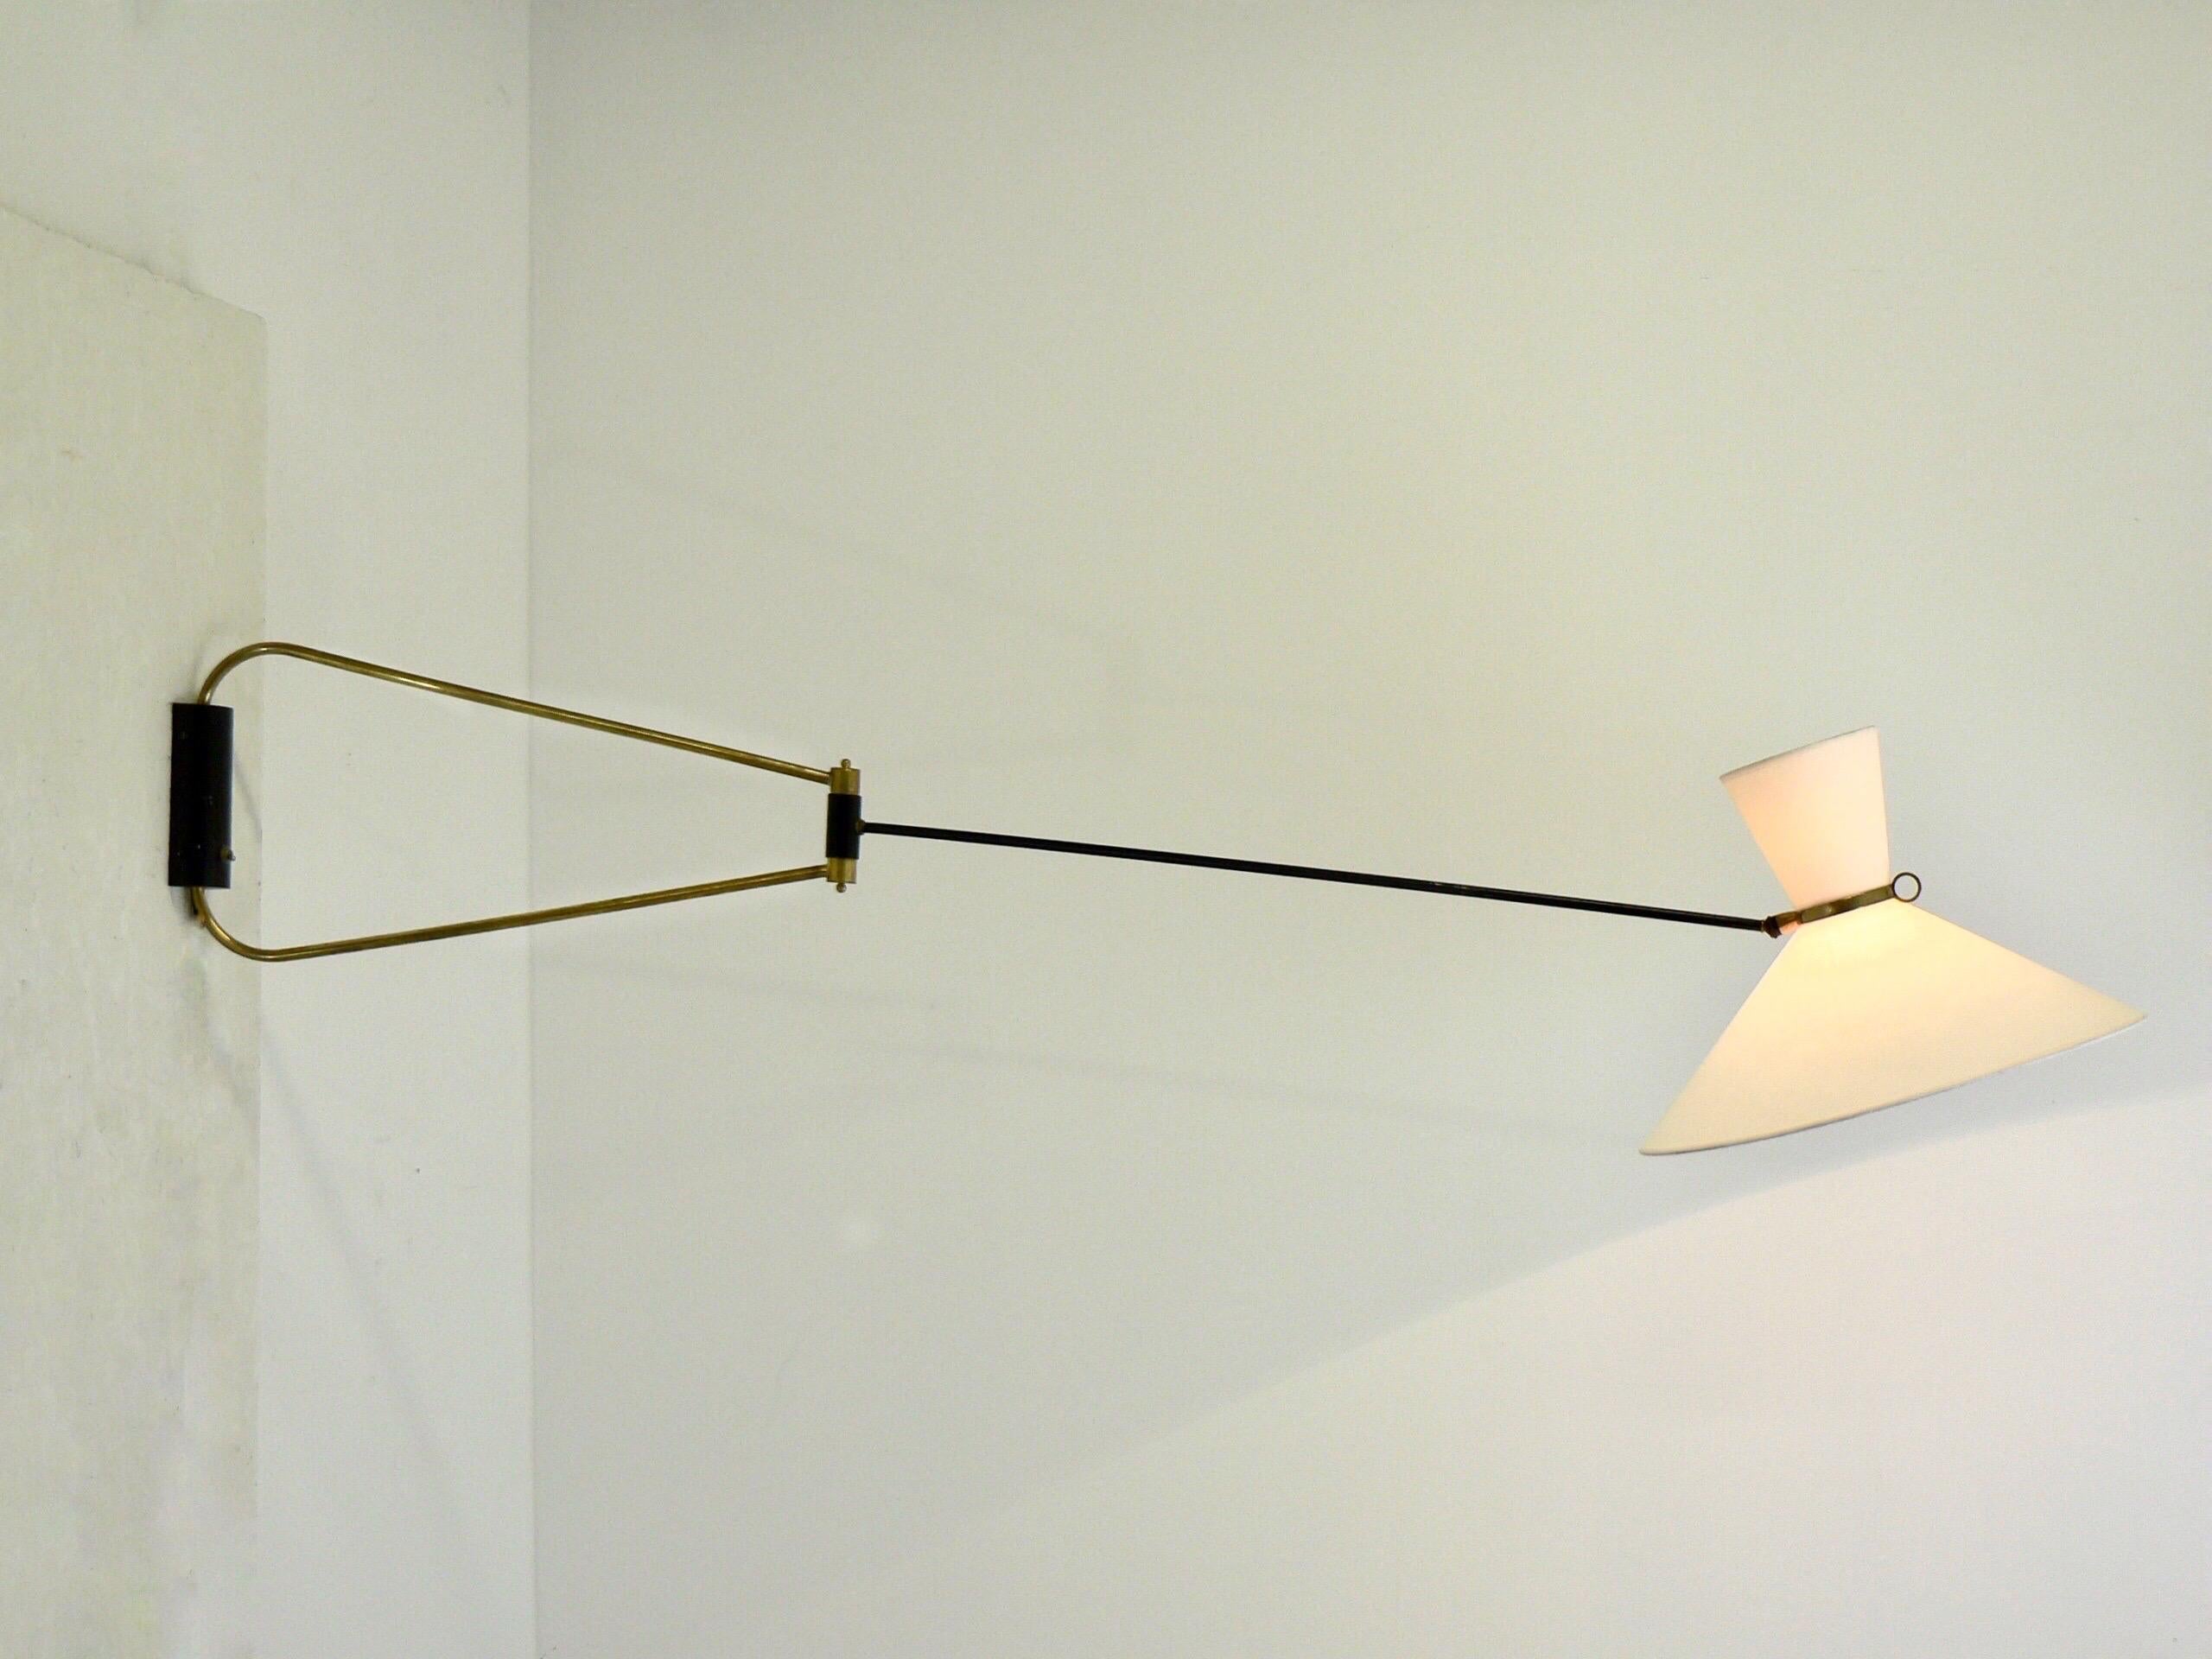 Robert Mathieu,
Foldable wall lamp.
Robert Mathieu Edition.

1952
Black lacquered metaln, gilded brass and fabric lamp shade.

Height: around 32 cm

Length max. 180 cm

Diameter with lamp shade: Around 45 cm

Good original condition, previously